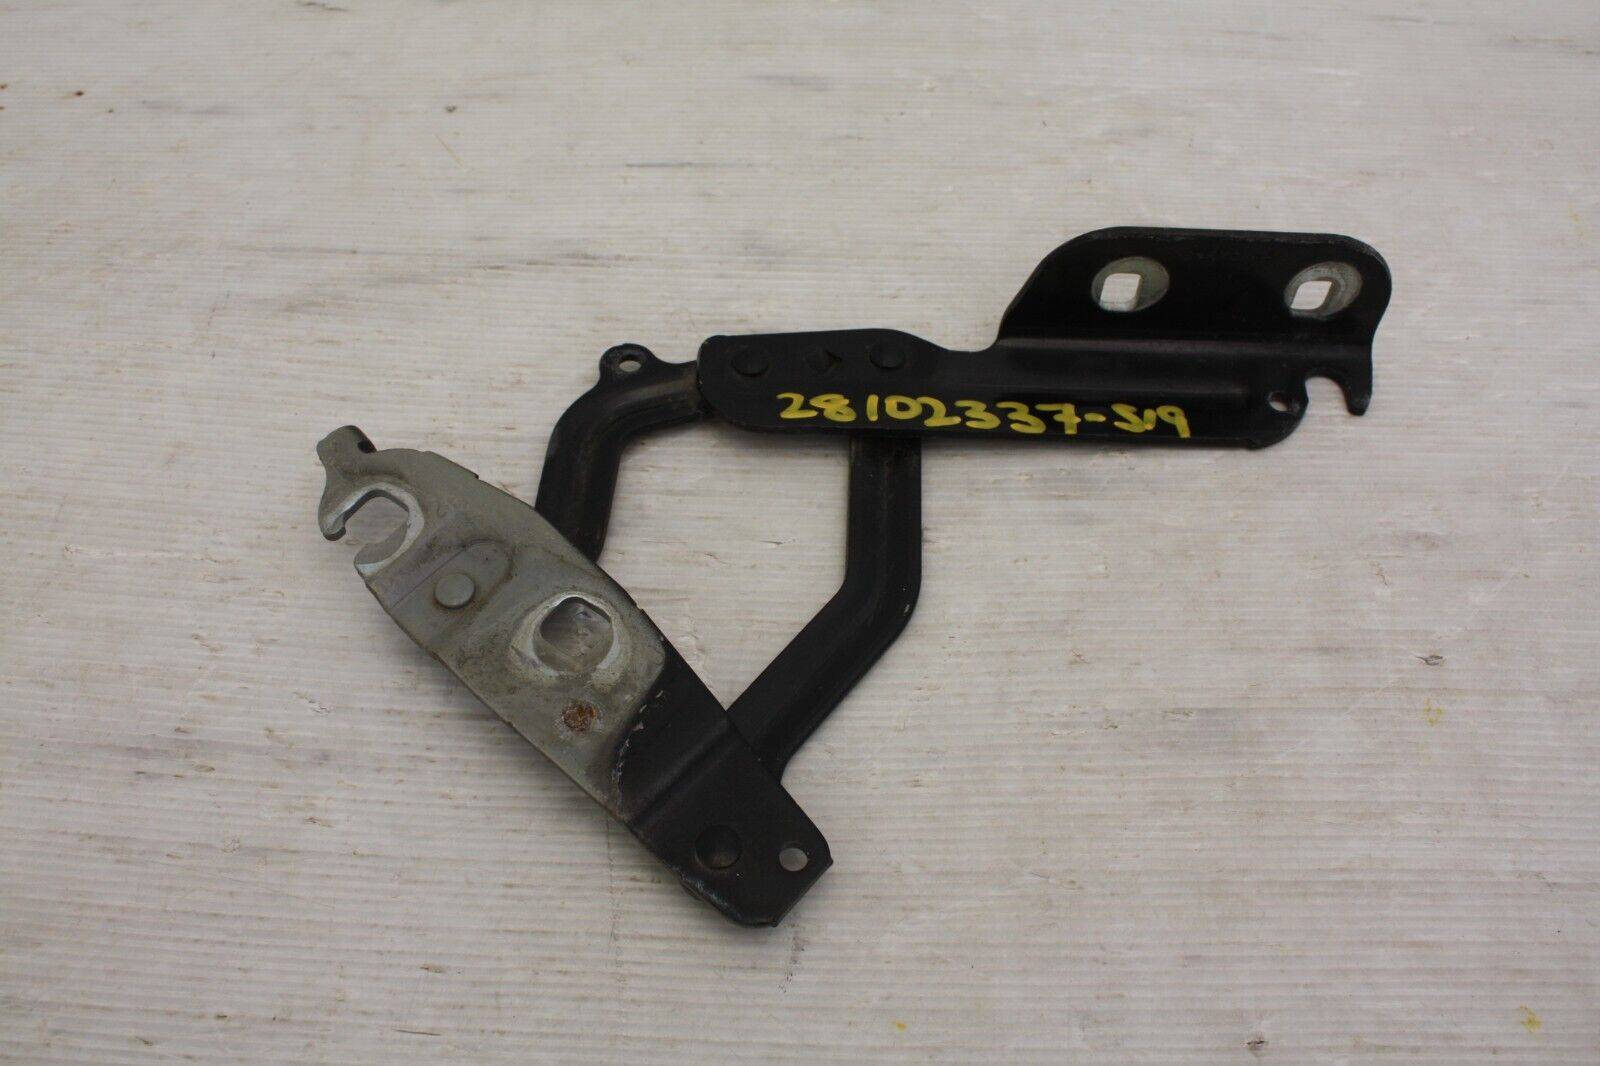 Ford-Fiesta-Left-Side-Bonnet-Hinge-2008-to-2012-8A61-16801-AD-Genuine-175996152432